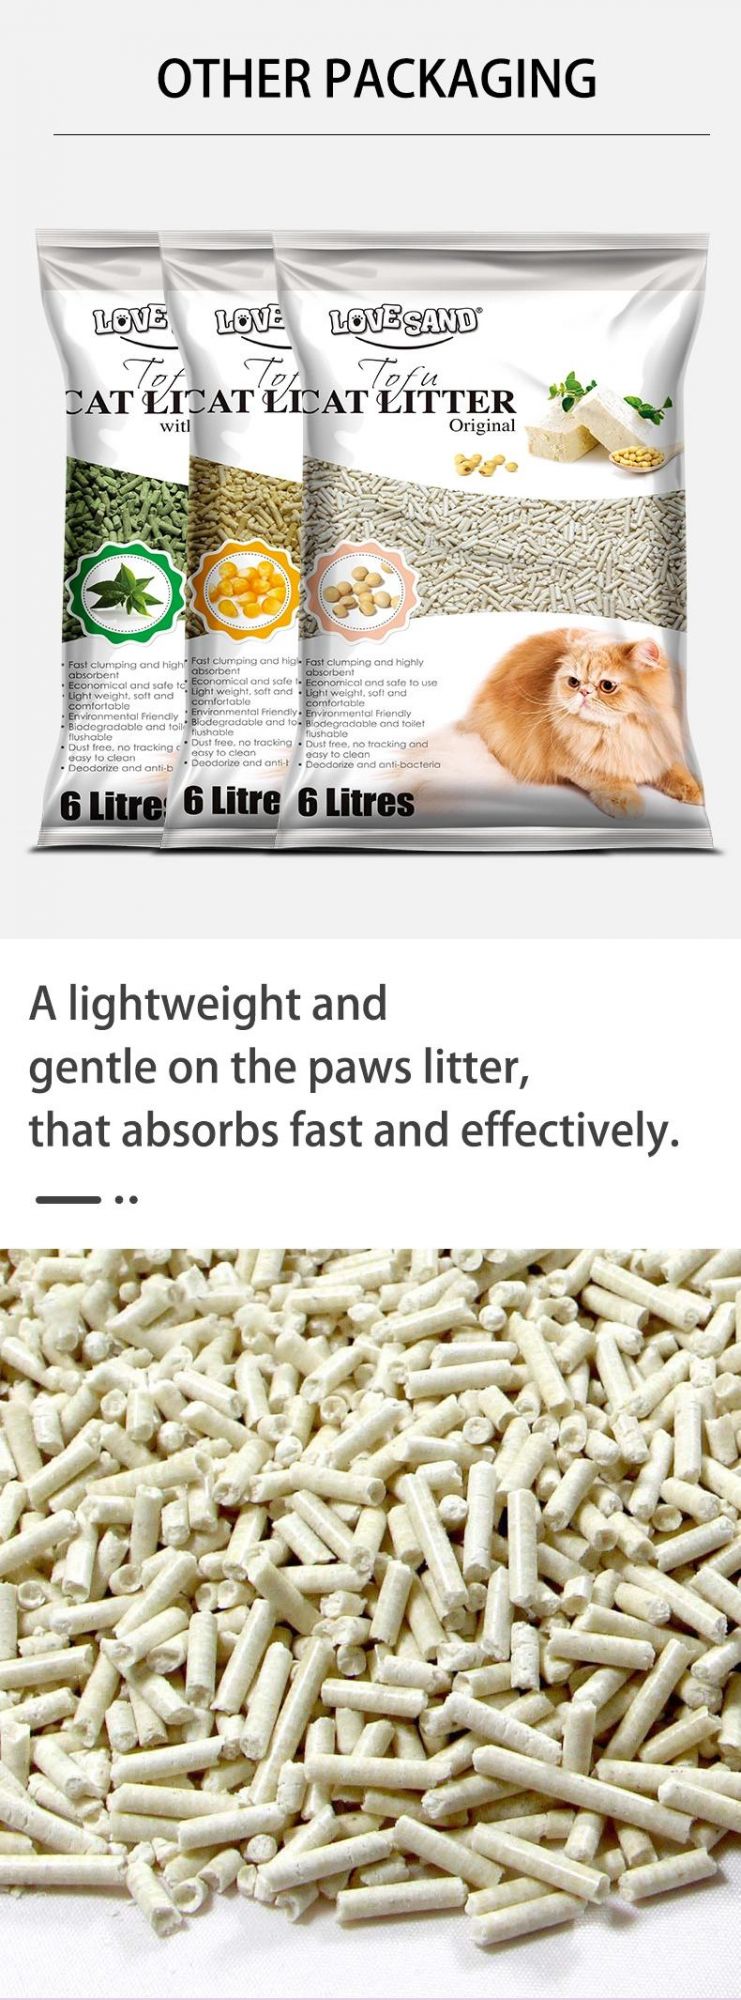 Emily Pets New Product Clumping Tofu Cat Litter